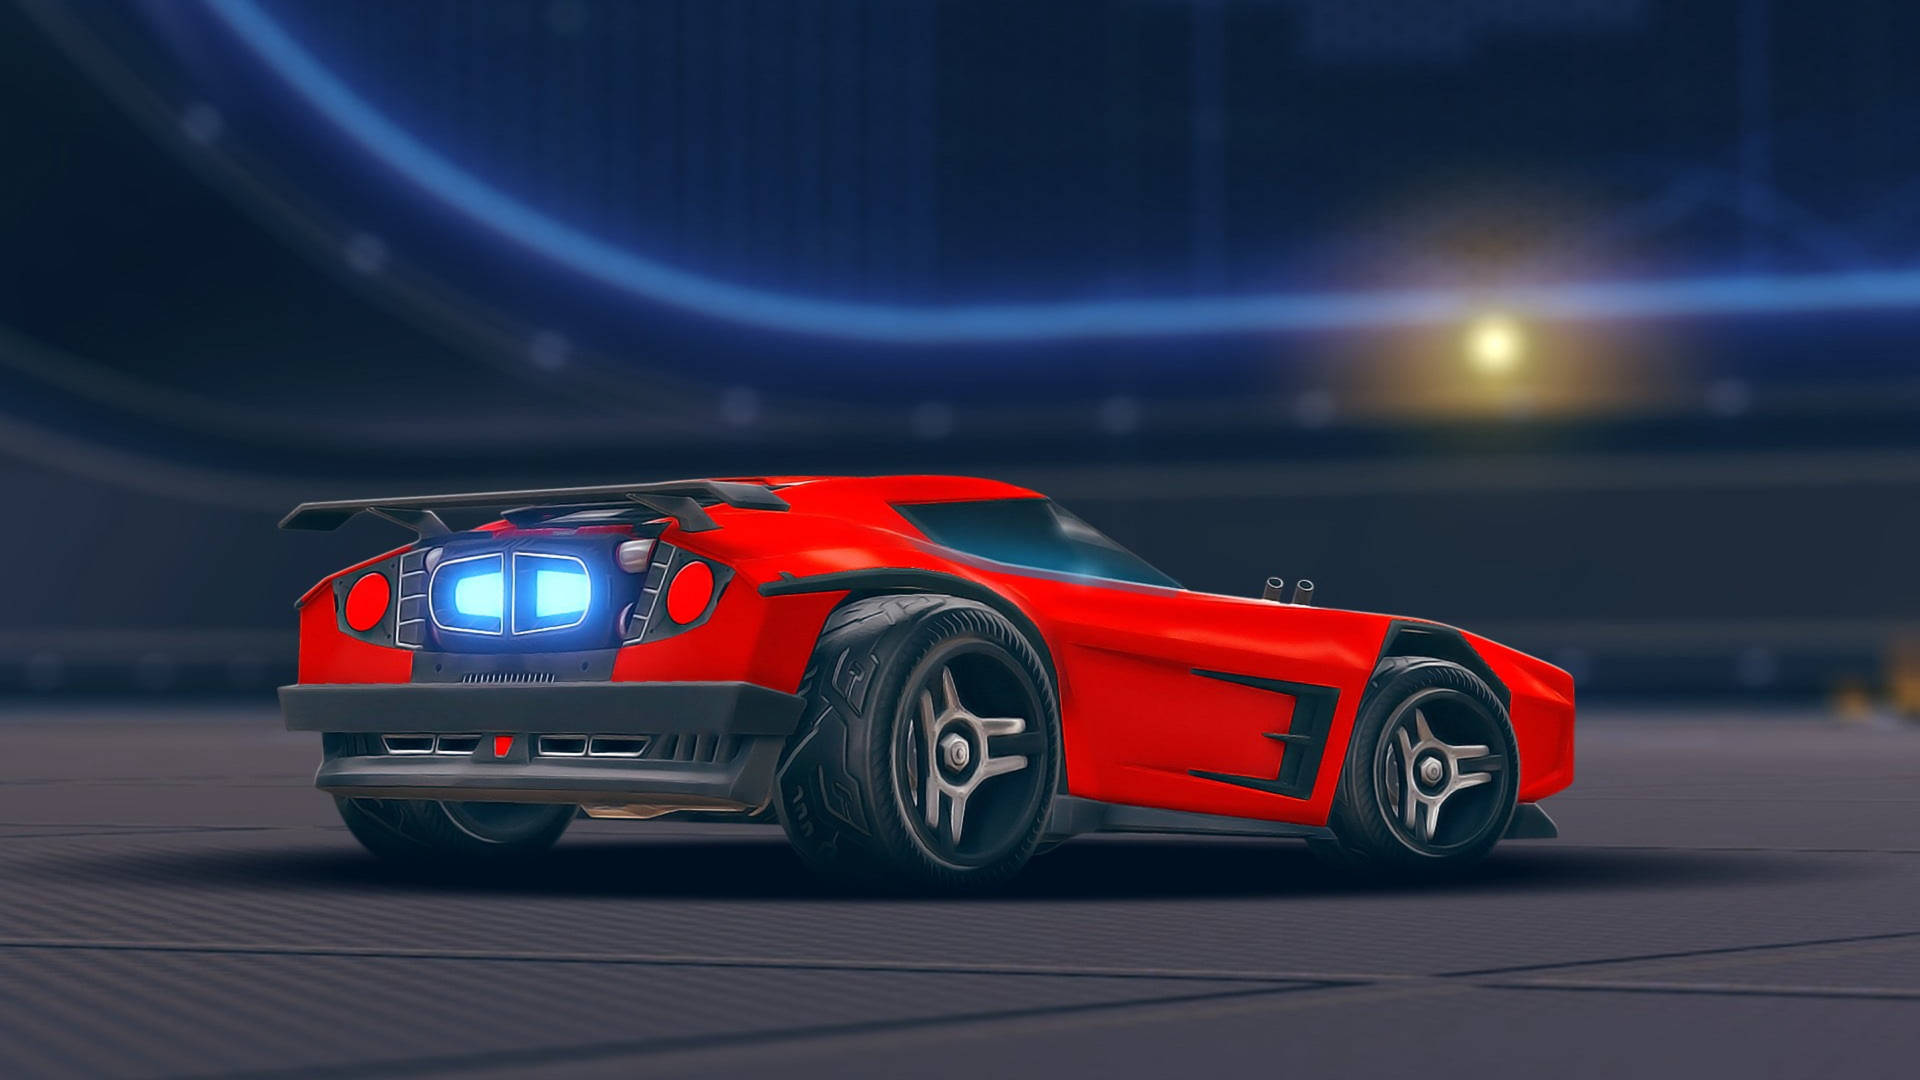 Rocket League Hd Red Car Background